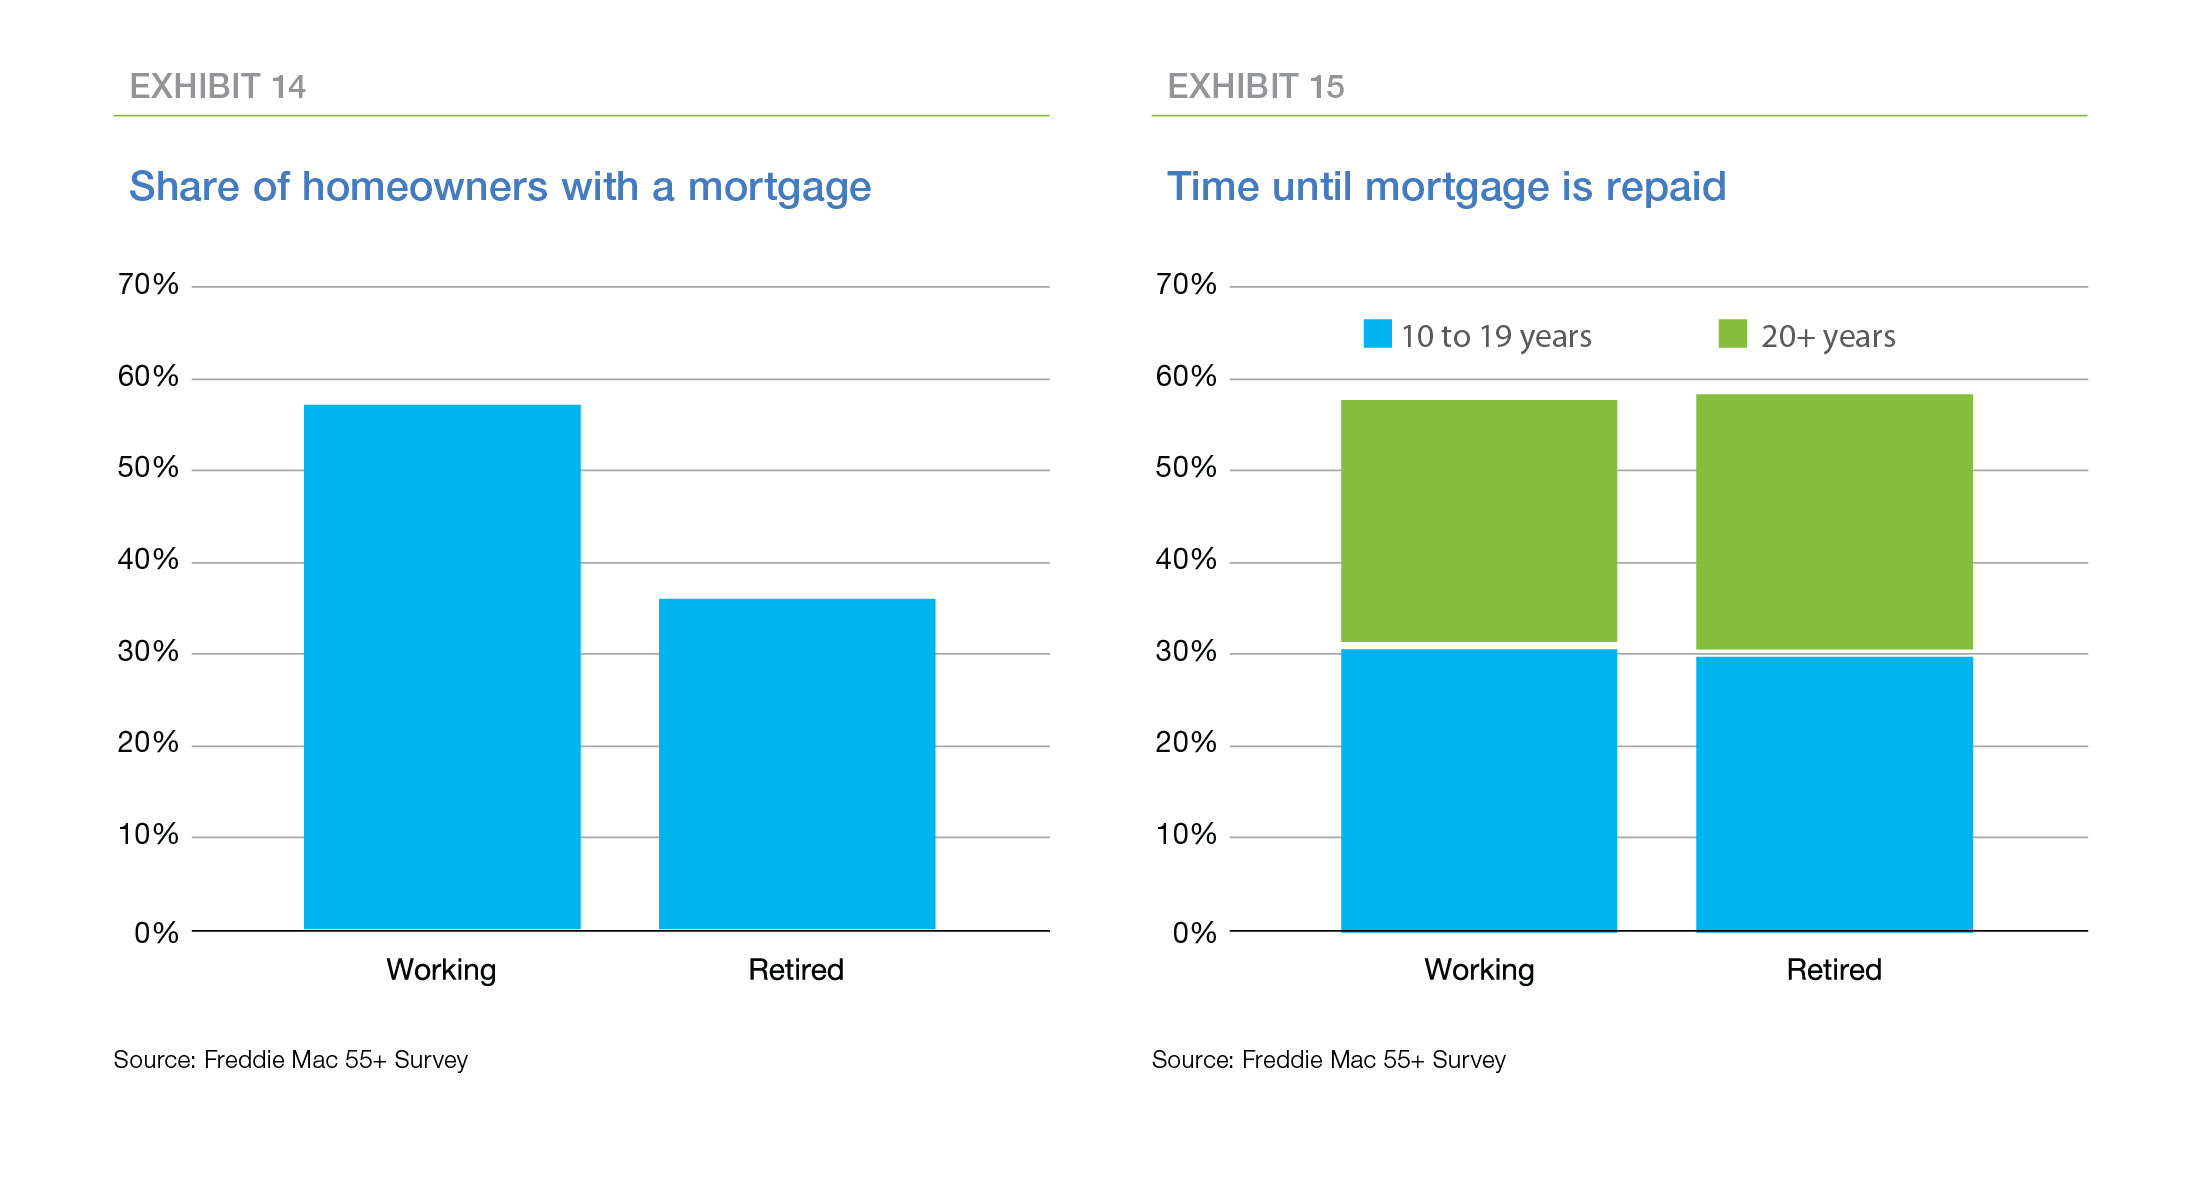 Exhibit 14 and 15: 'Share of homeowners with a mortgage' and Time until mortage is repaid